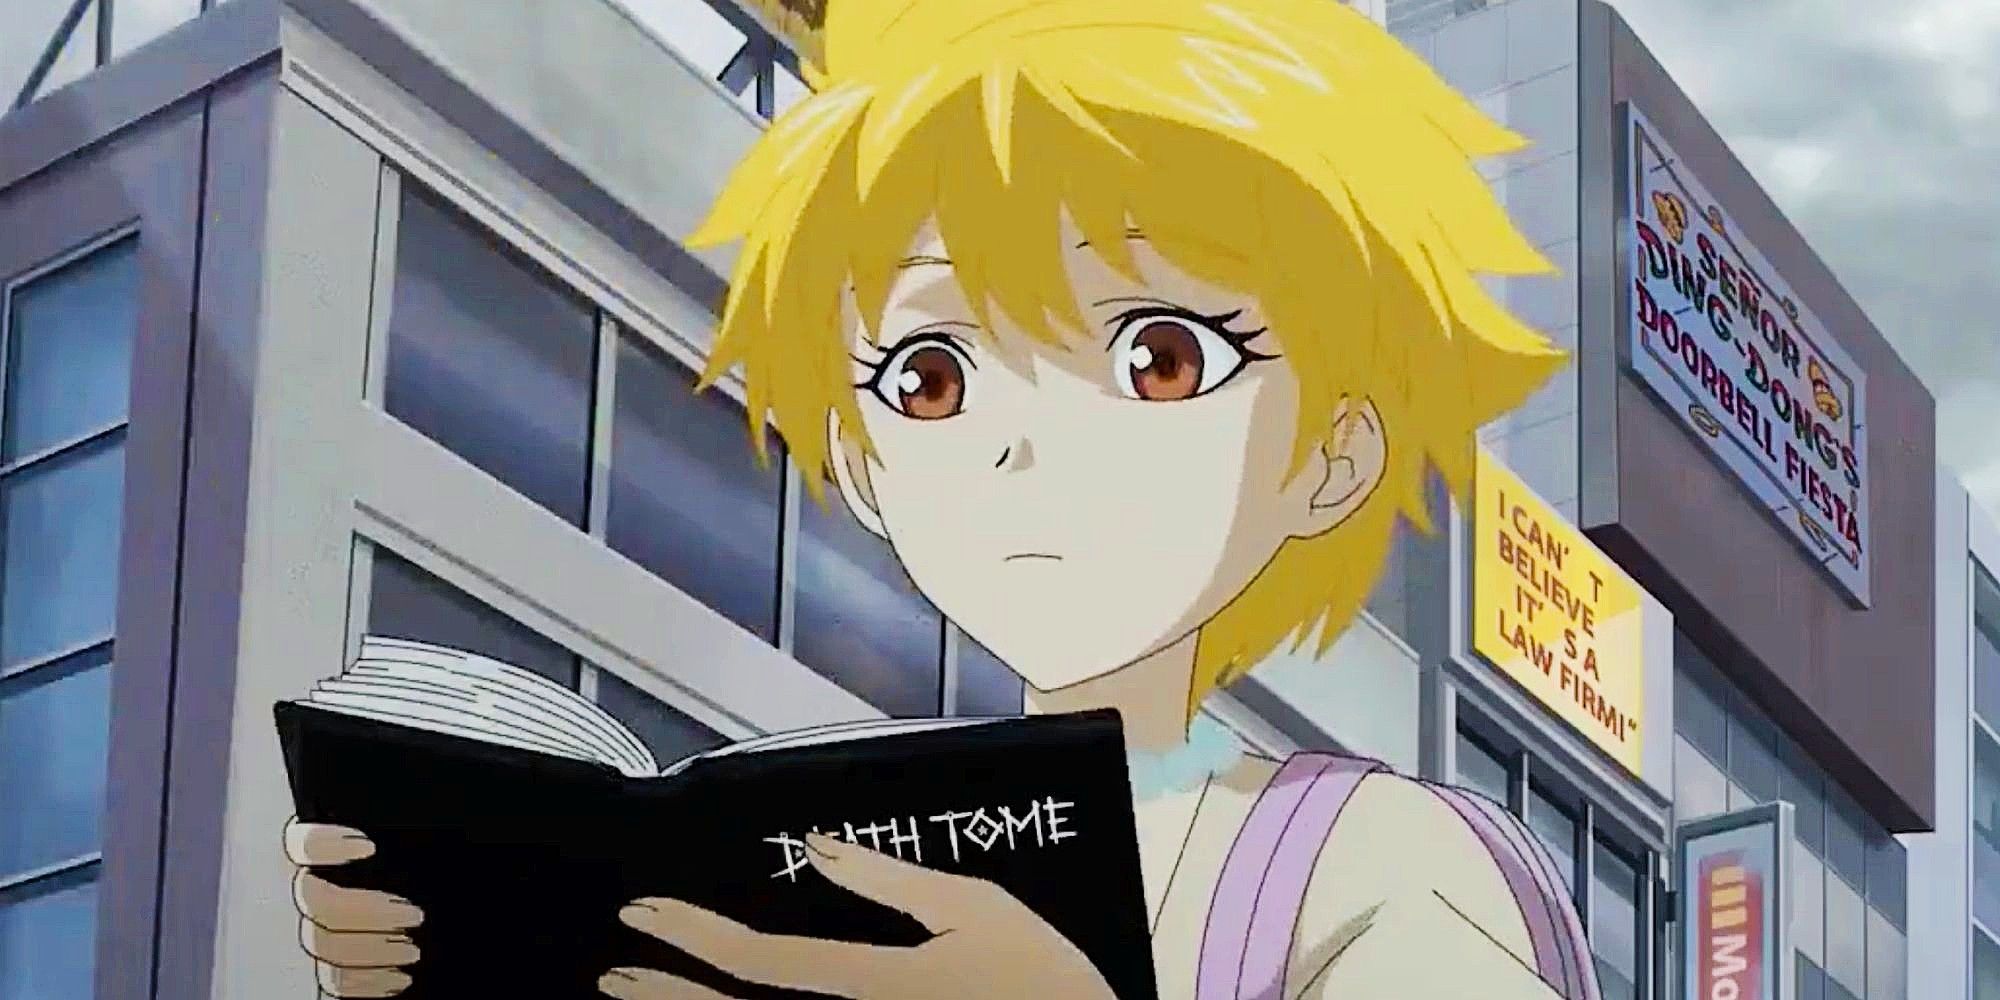 The Simpsons Season 34 Streaming Release Date Revealed With Hysterical Death Note Anime Reference